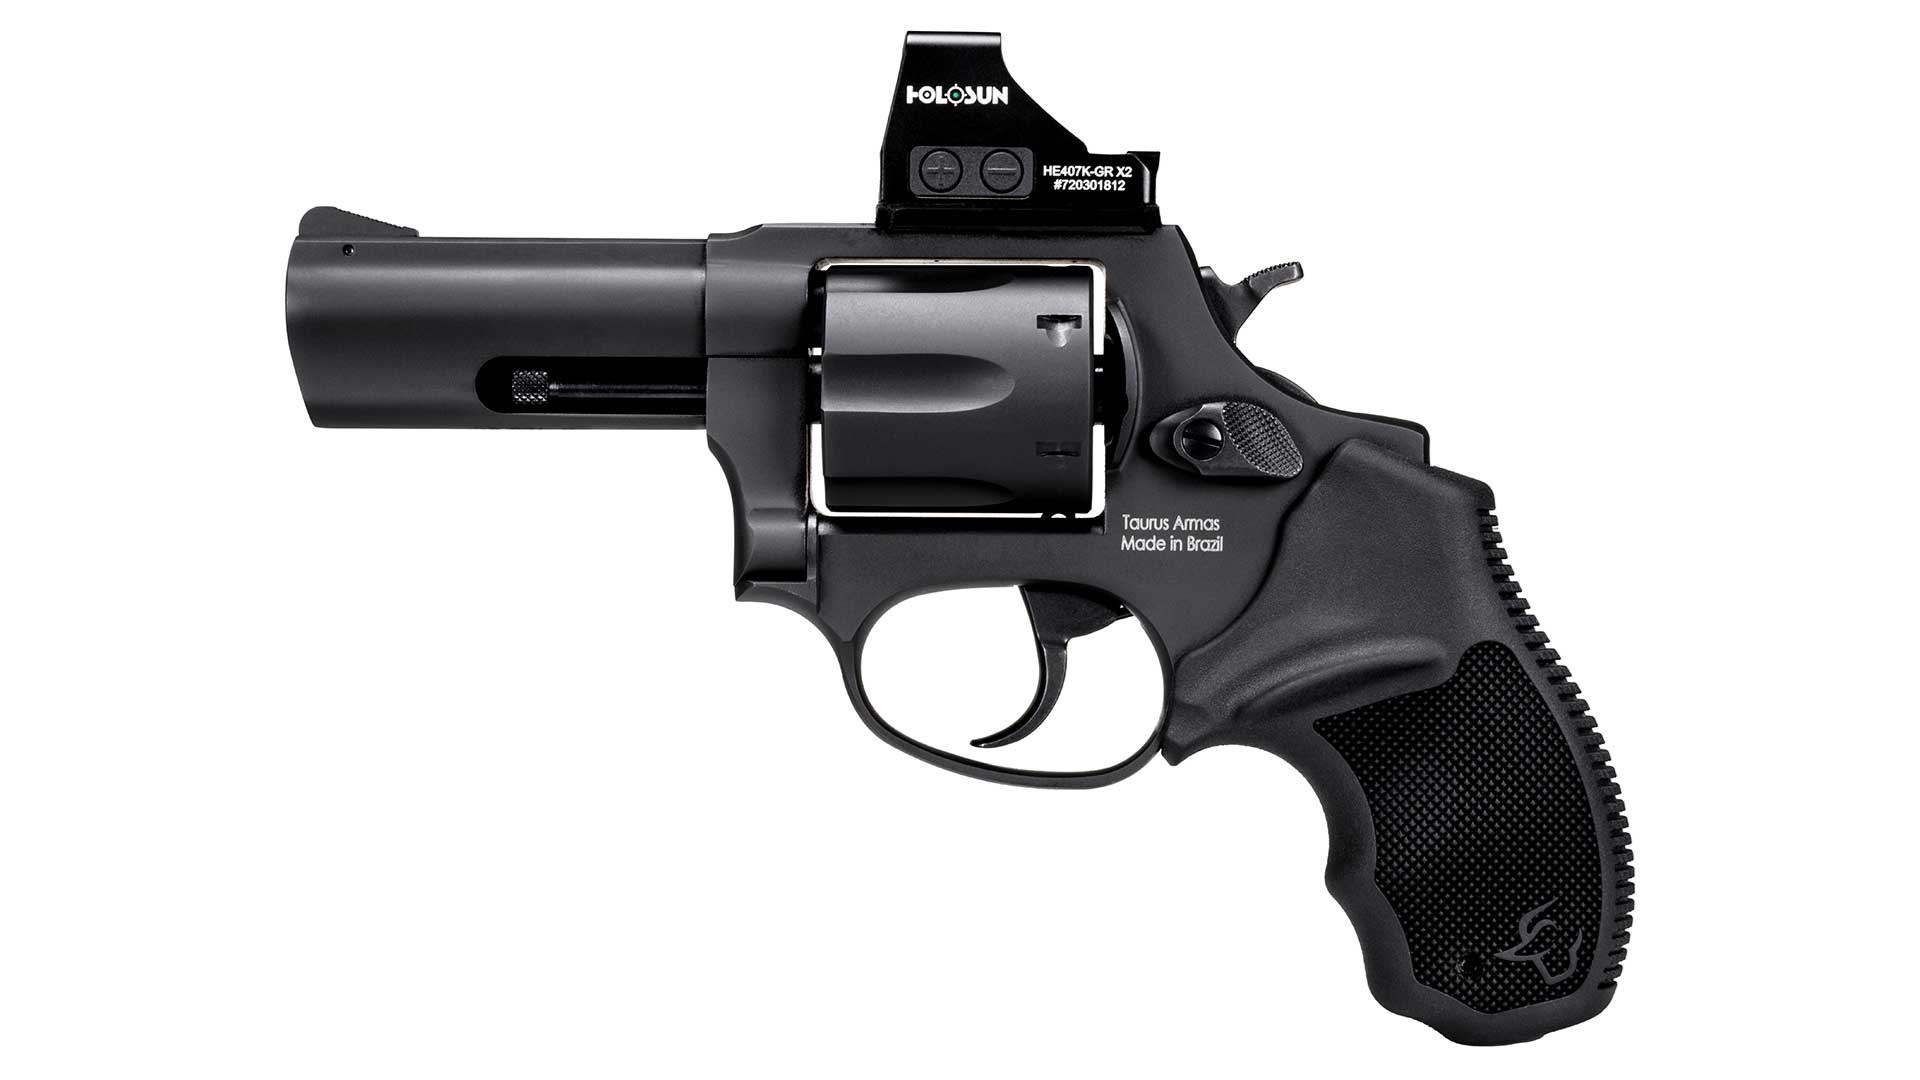 Left side of the all-black Taurus 856 revolver in .38 Special shown on white, with a Holosun red-dot sight mounted on top.